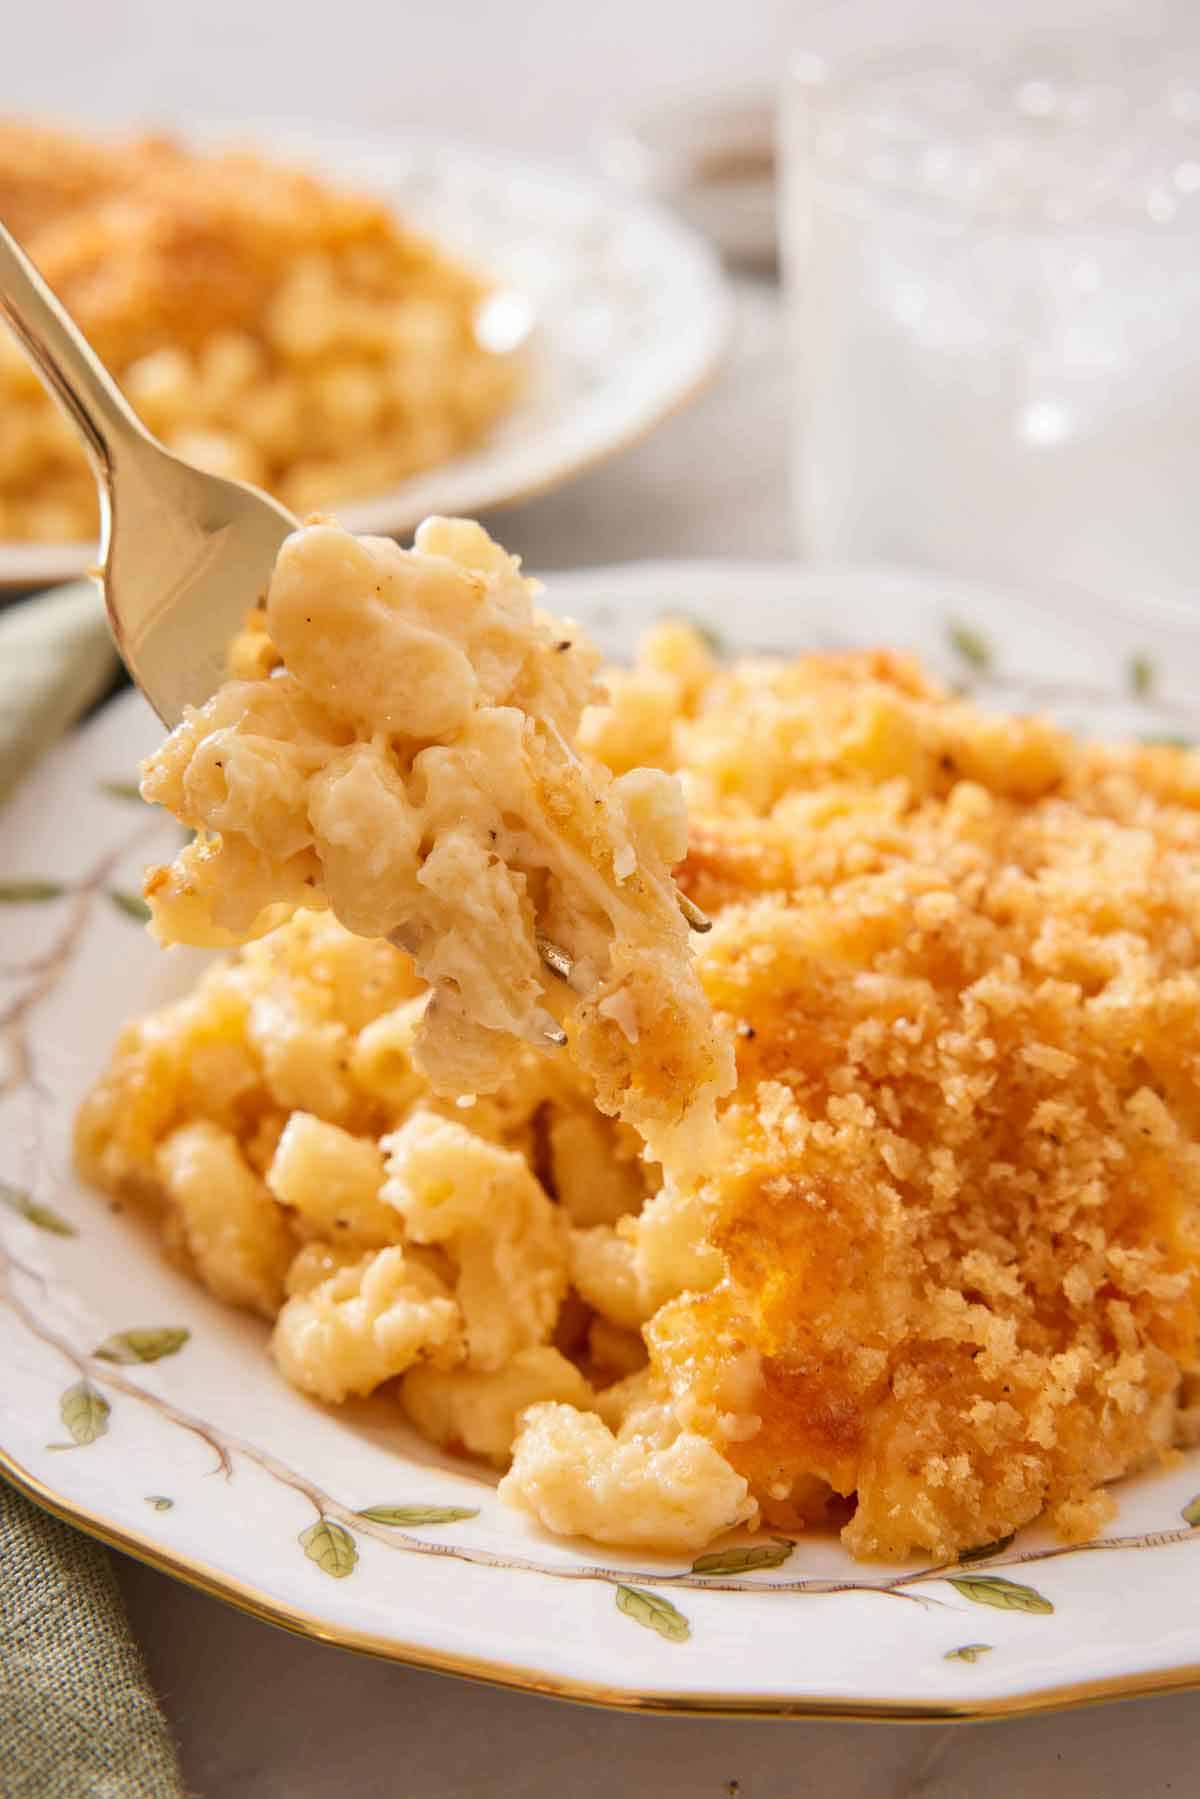 A forkful of baked mac and cheese lifted off a plate.